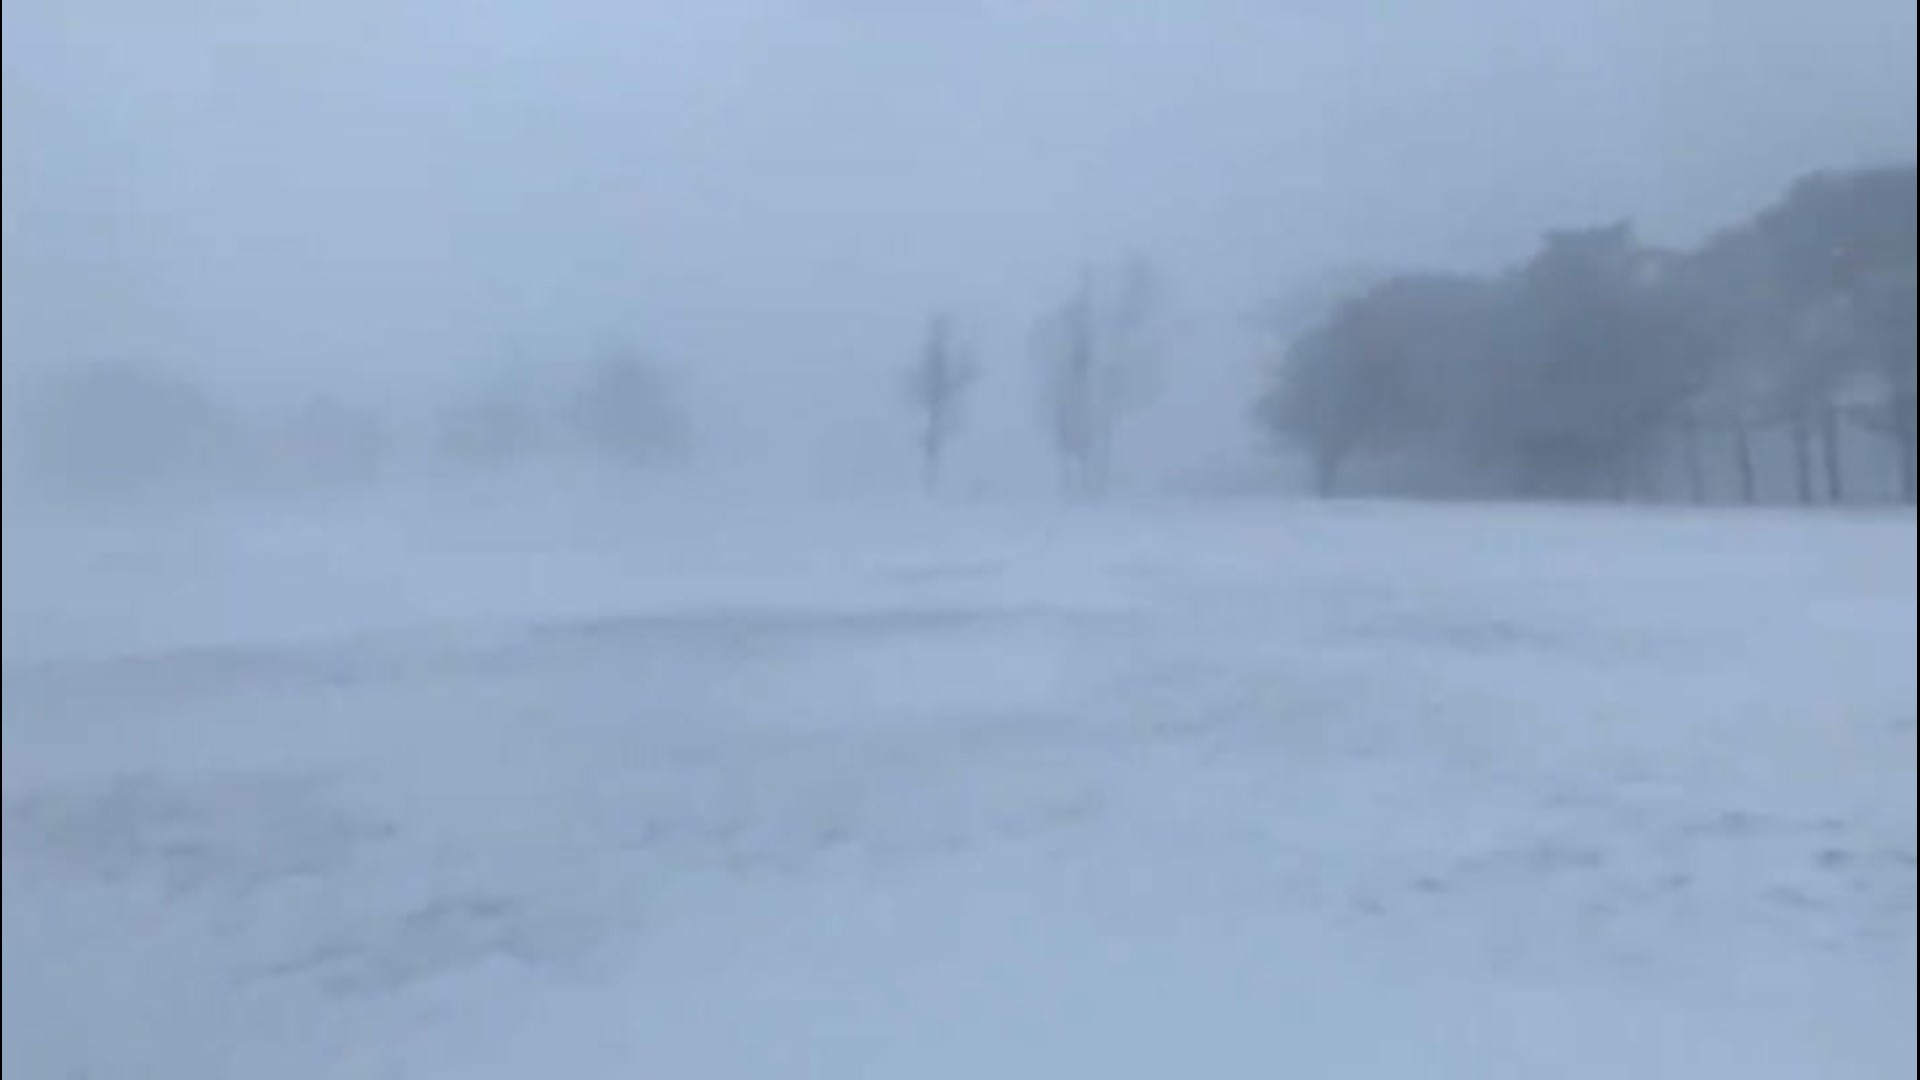 Near-whiteout conditions were prevalent in Oswego, New York, with wind gusts over 40 miles per hour on Feb. 27.